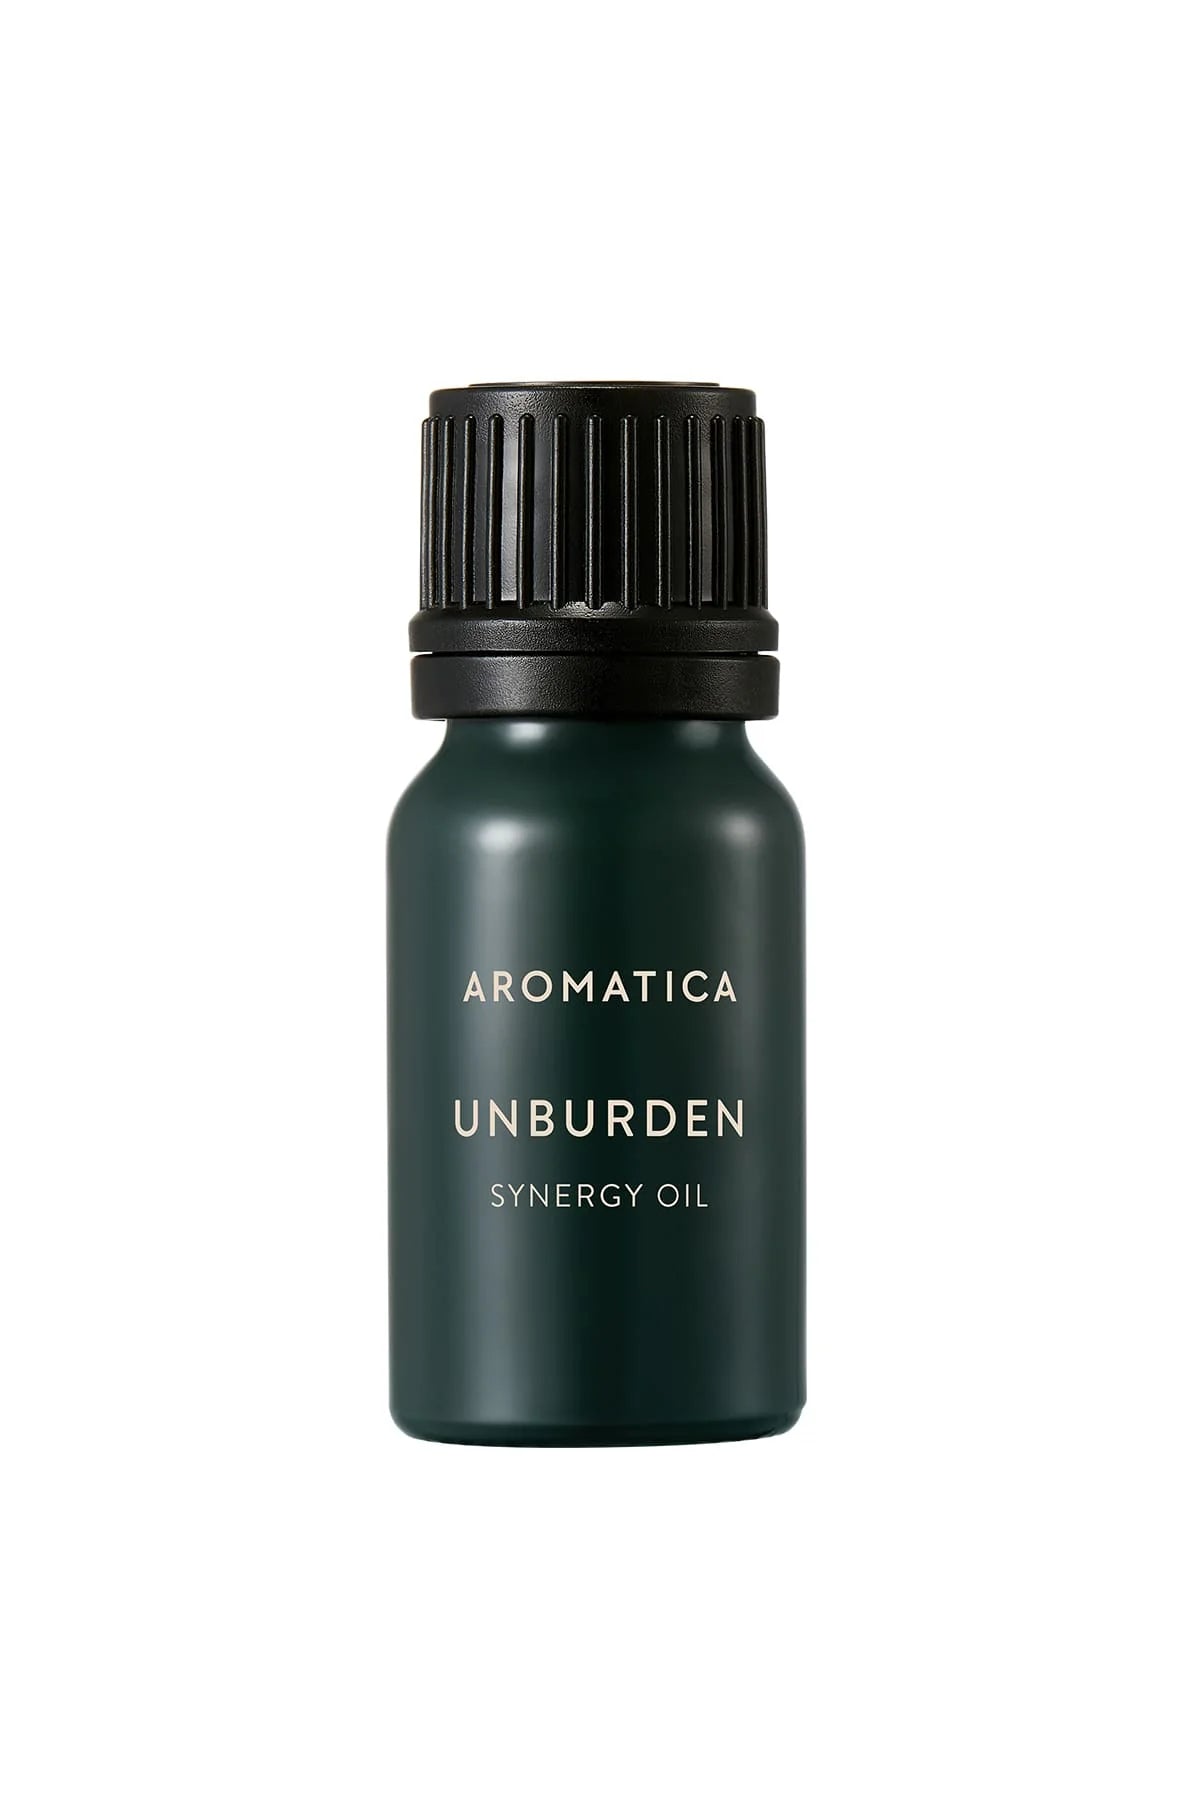 Aromatica Unburden Synergy – SIMPLE AS IS